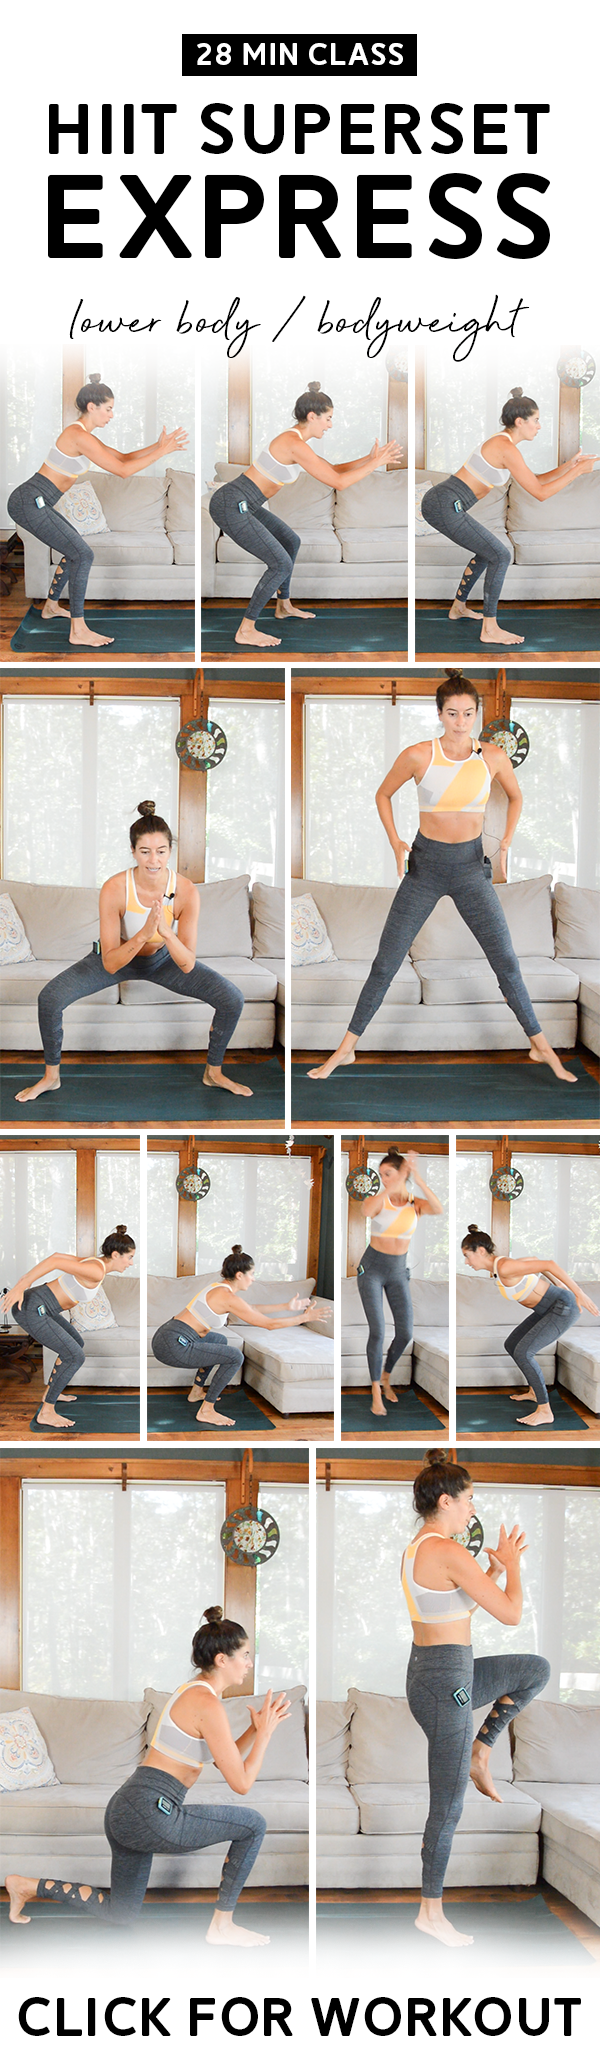 HIIT Superset Express Workout (28 Mins): Lower Body Focus | No equipment needed for this HIIT Superset class! The Express version is quicker, with three supersets instead of five. Warm up and cool down included. #hiit #intervaltraining #homeworkout